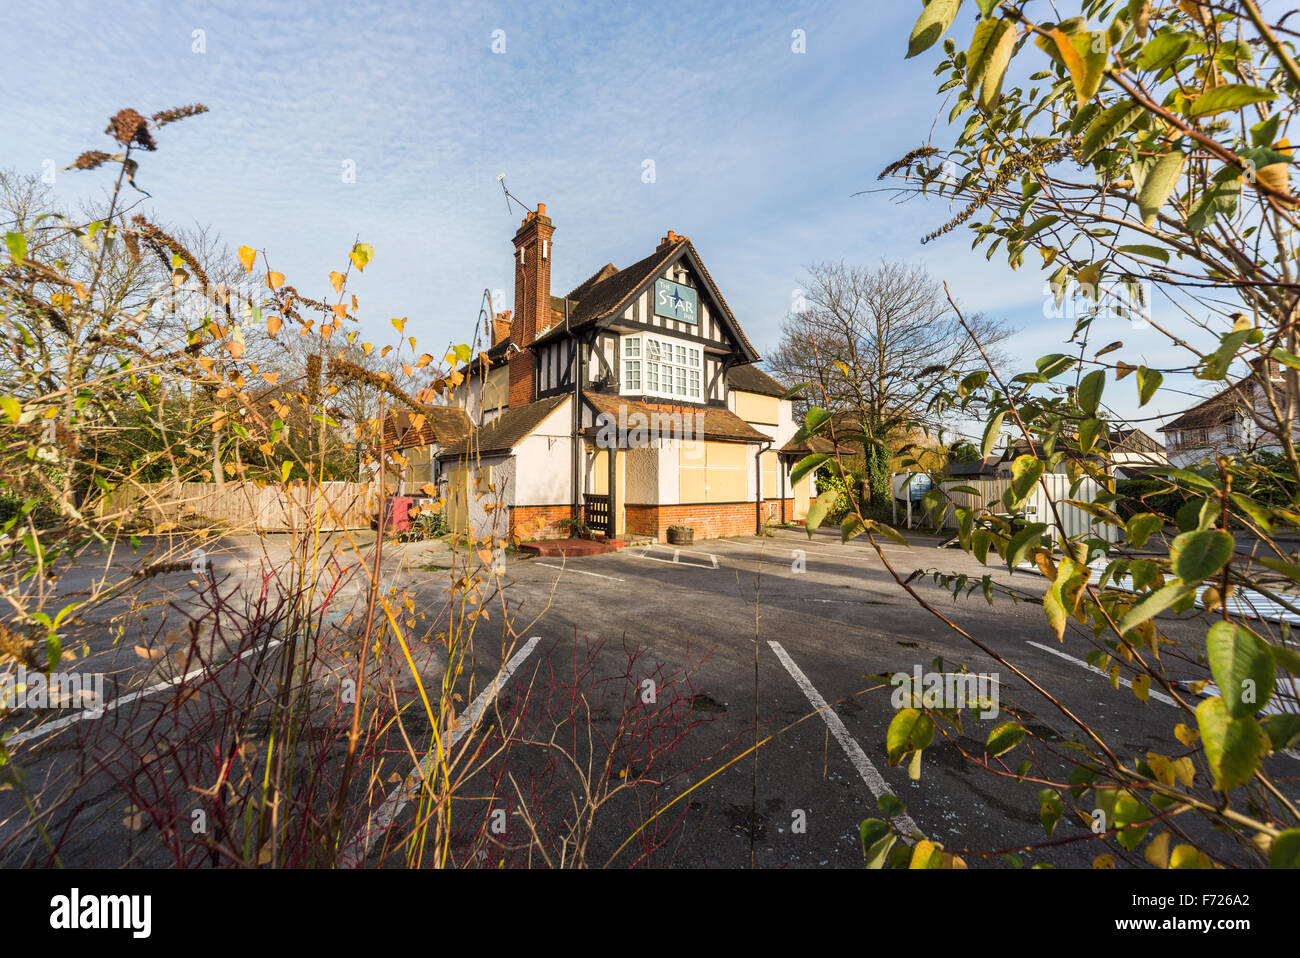 The Star Inn public house, a closed down, boarded up pub in Woking, Surrey, UK awaiting redevelopment Stock Photo